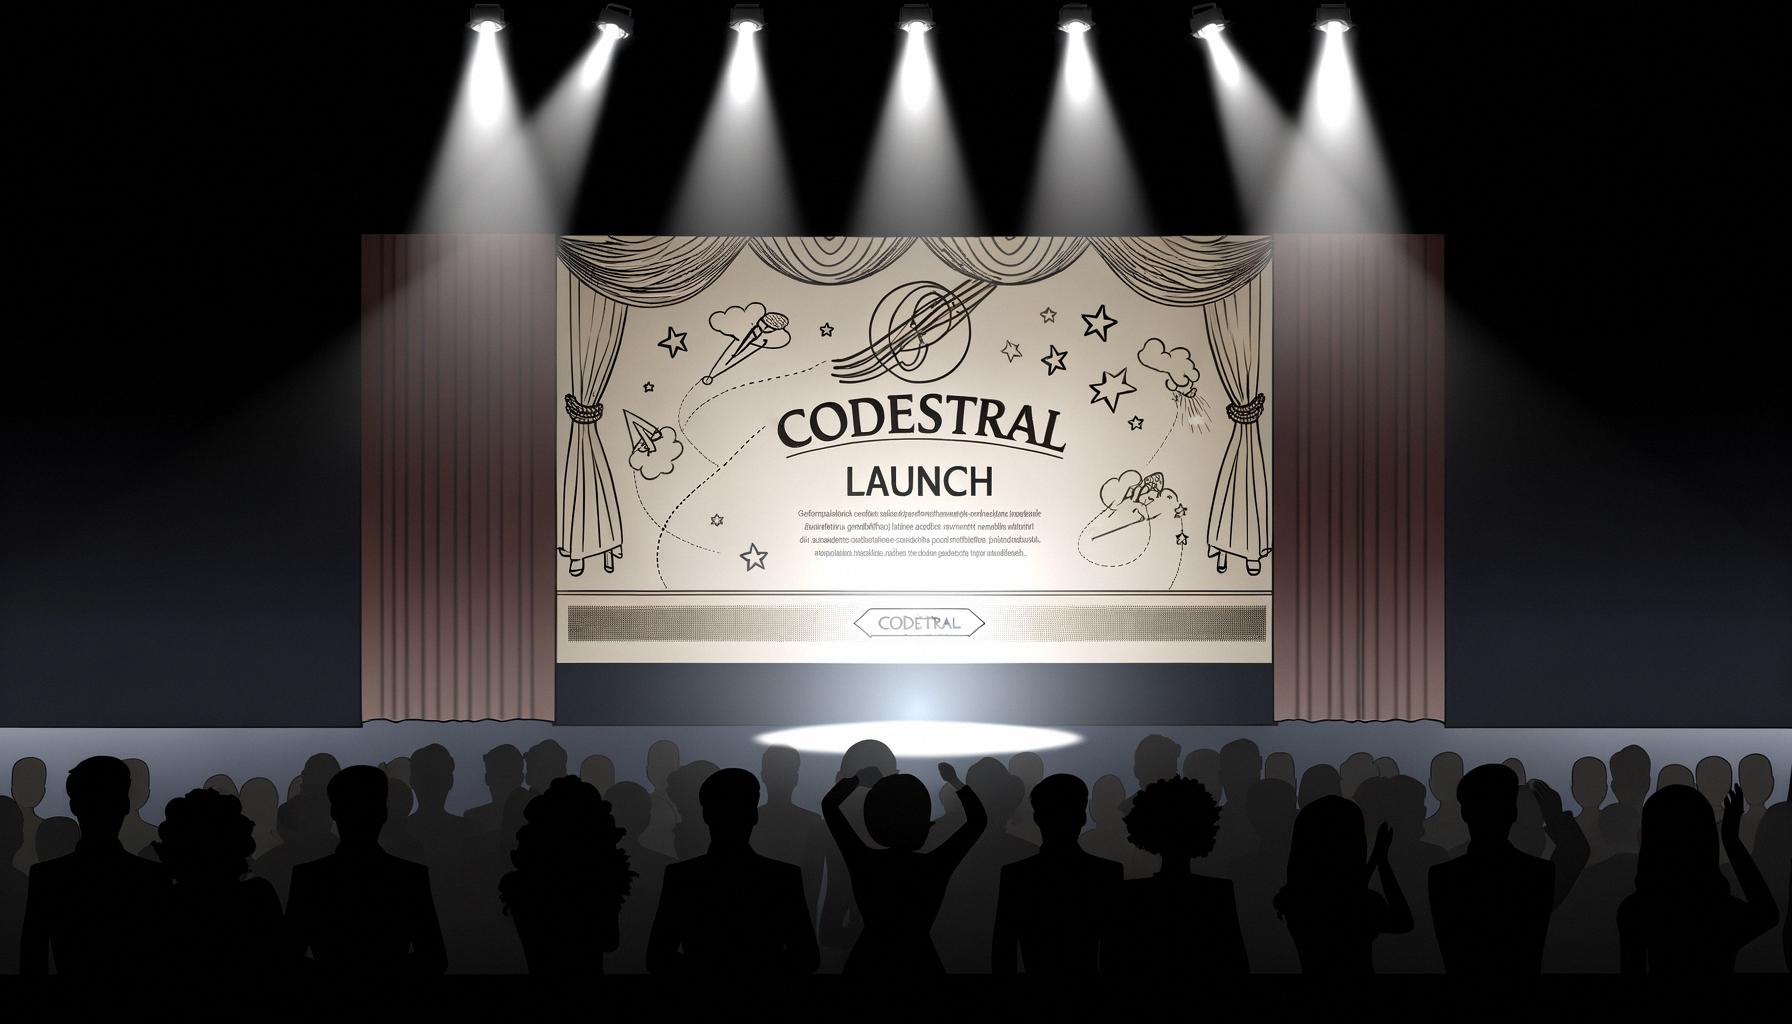 Mistral's launch of Codestral Balanced News